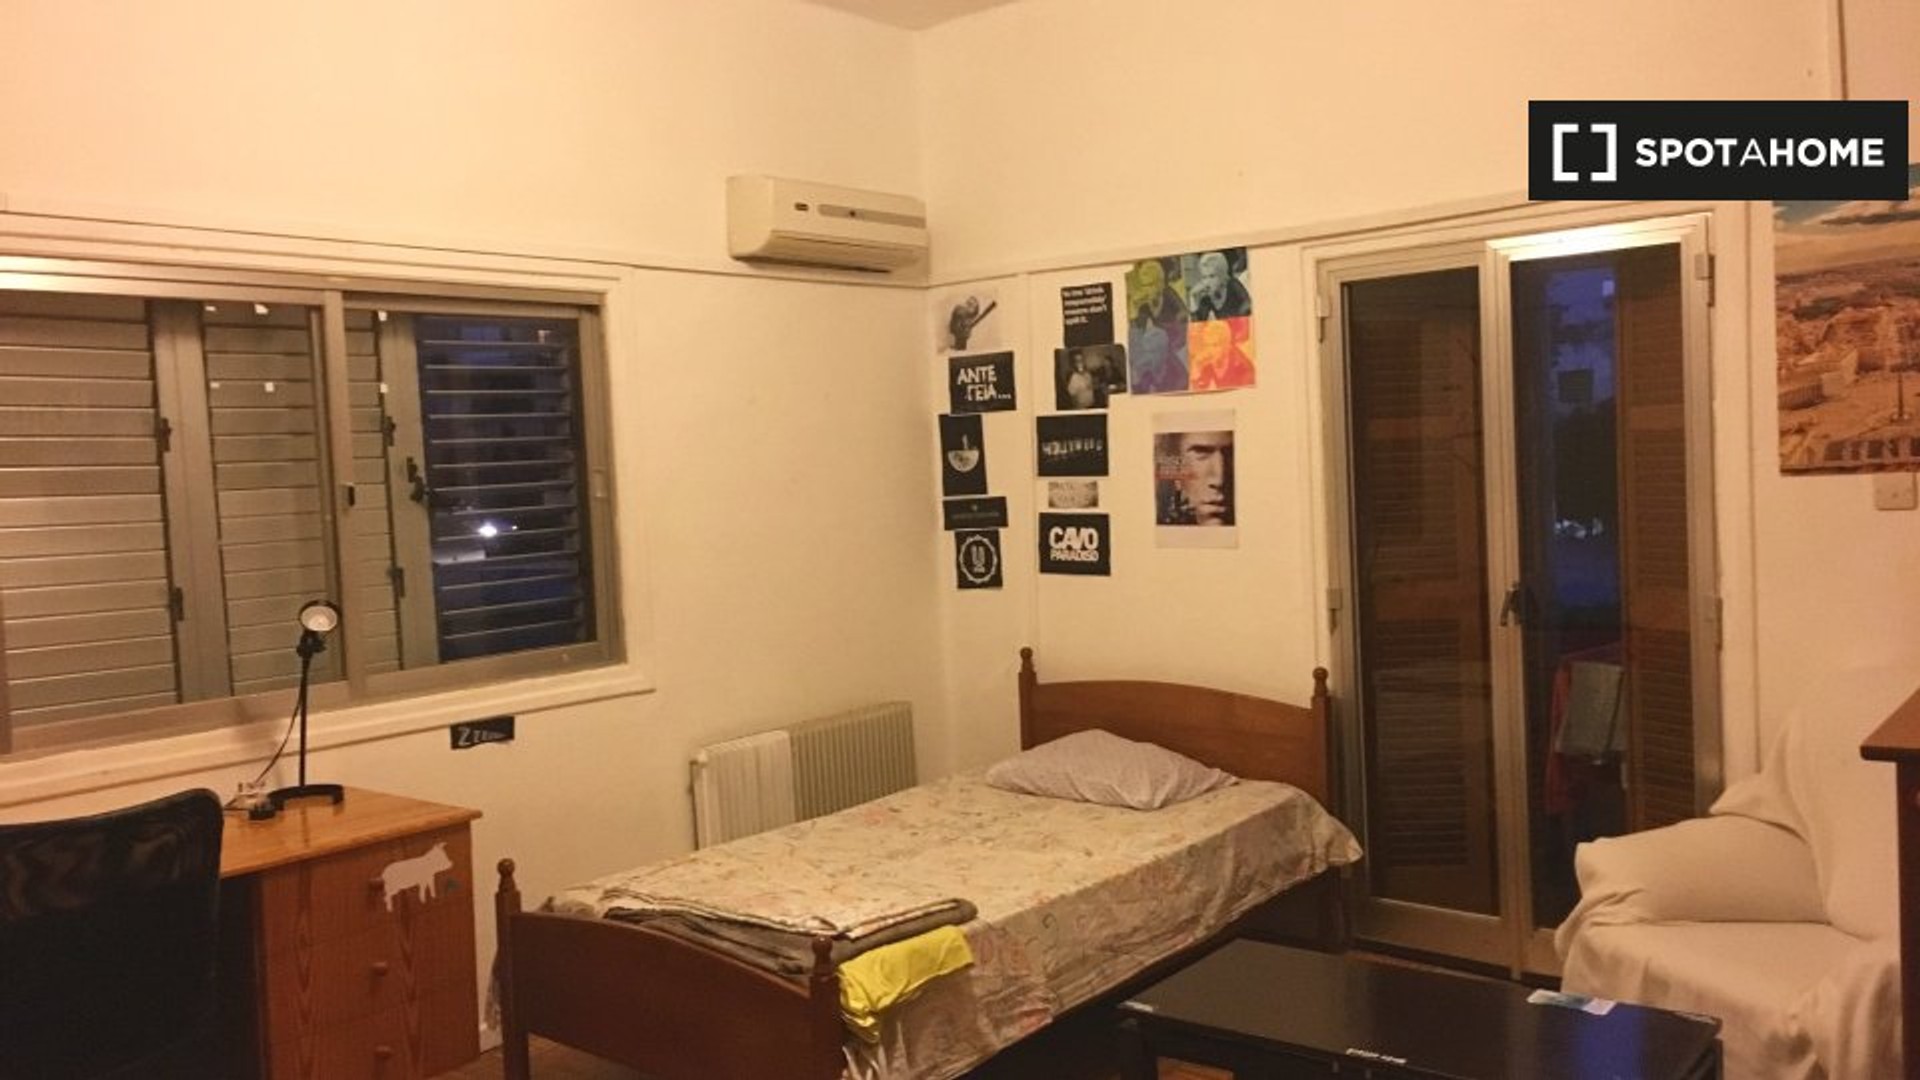 Renting rooms by the month in Nicosia